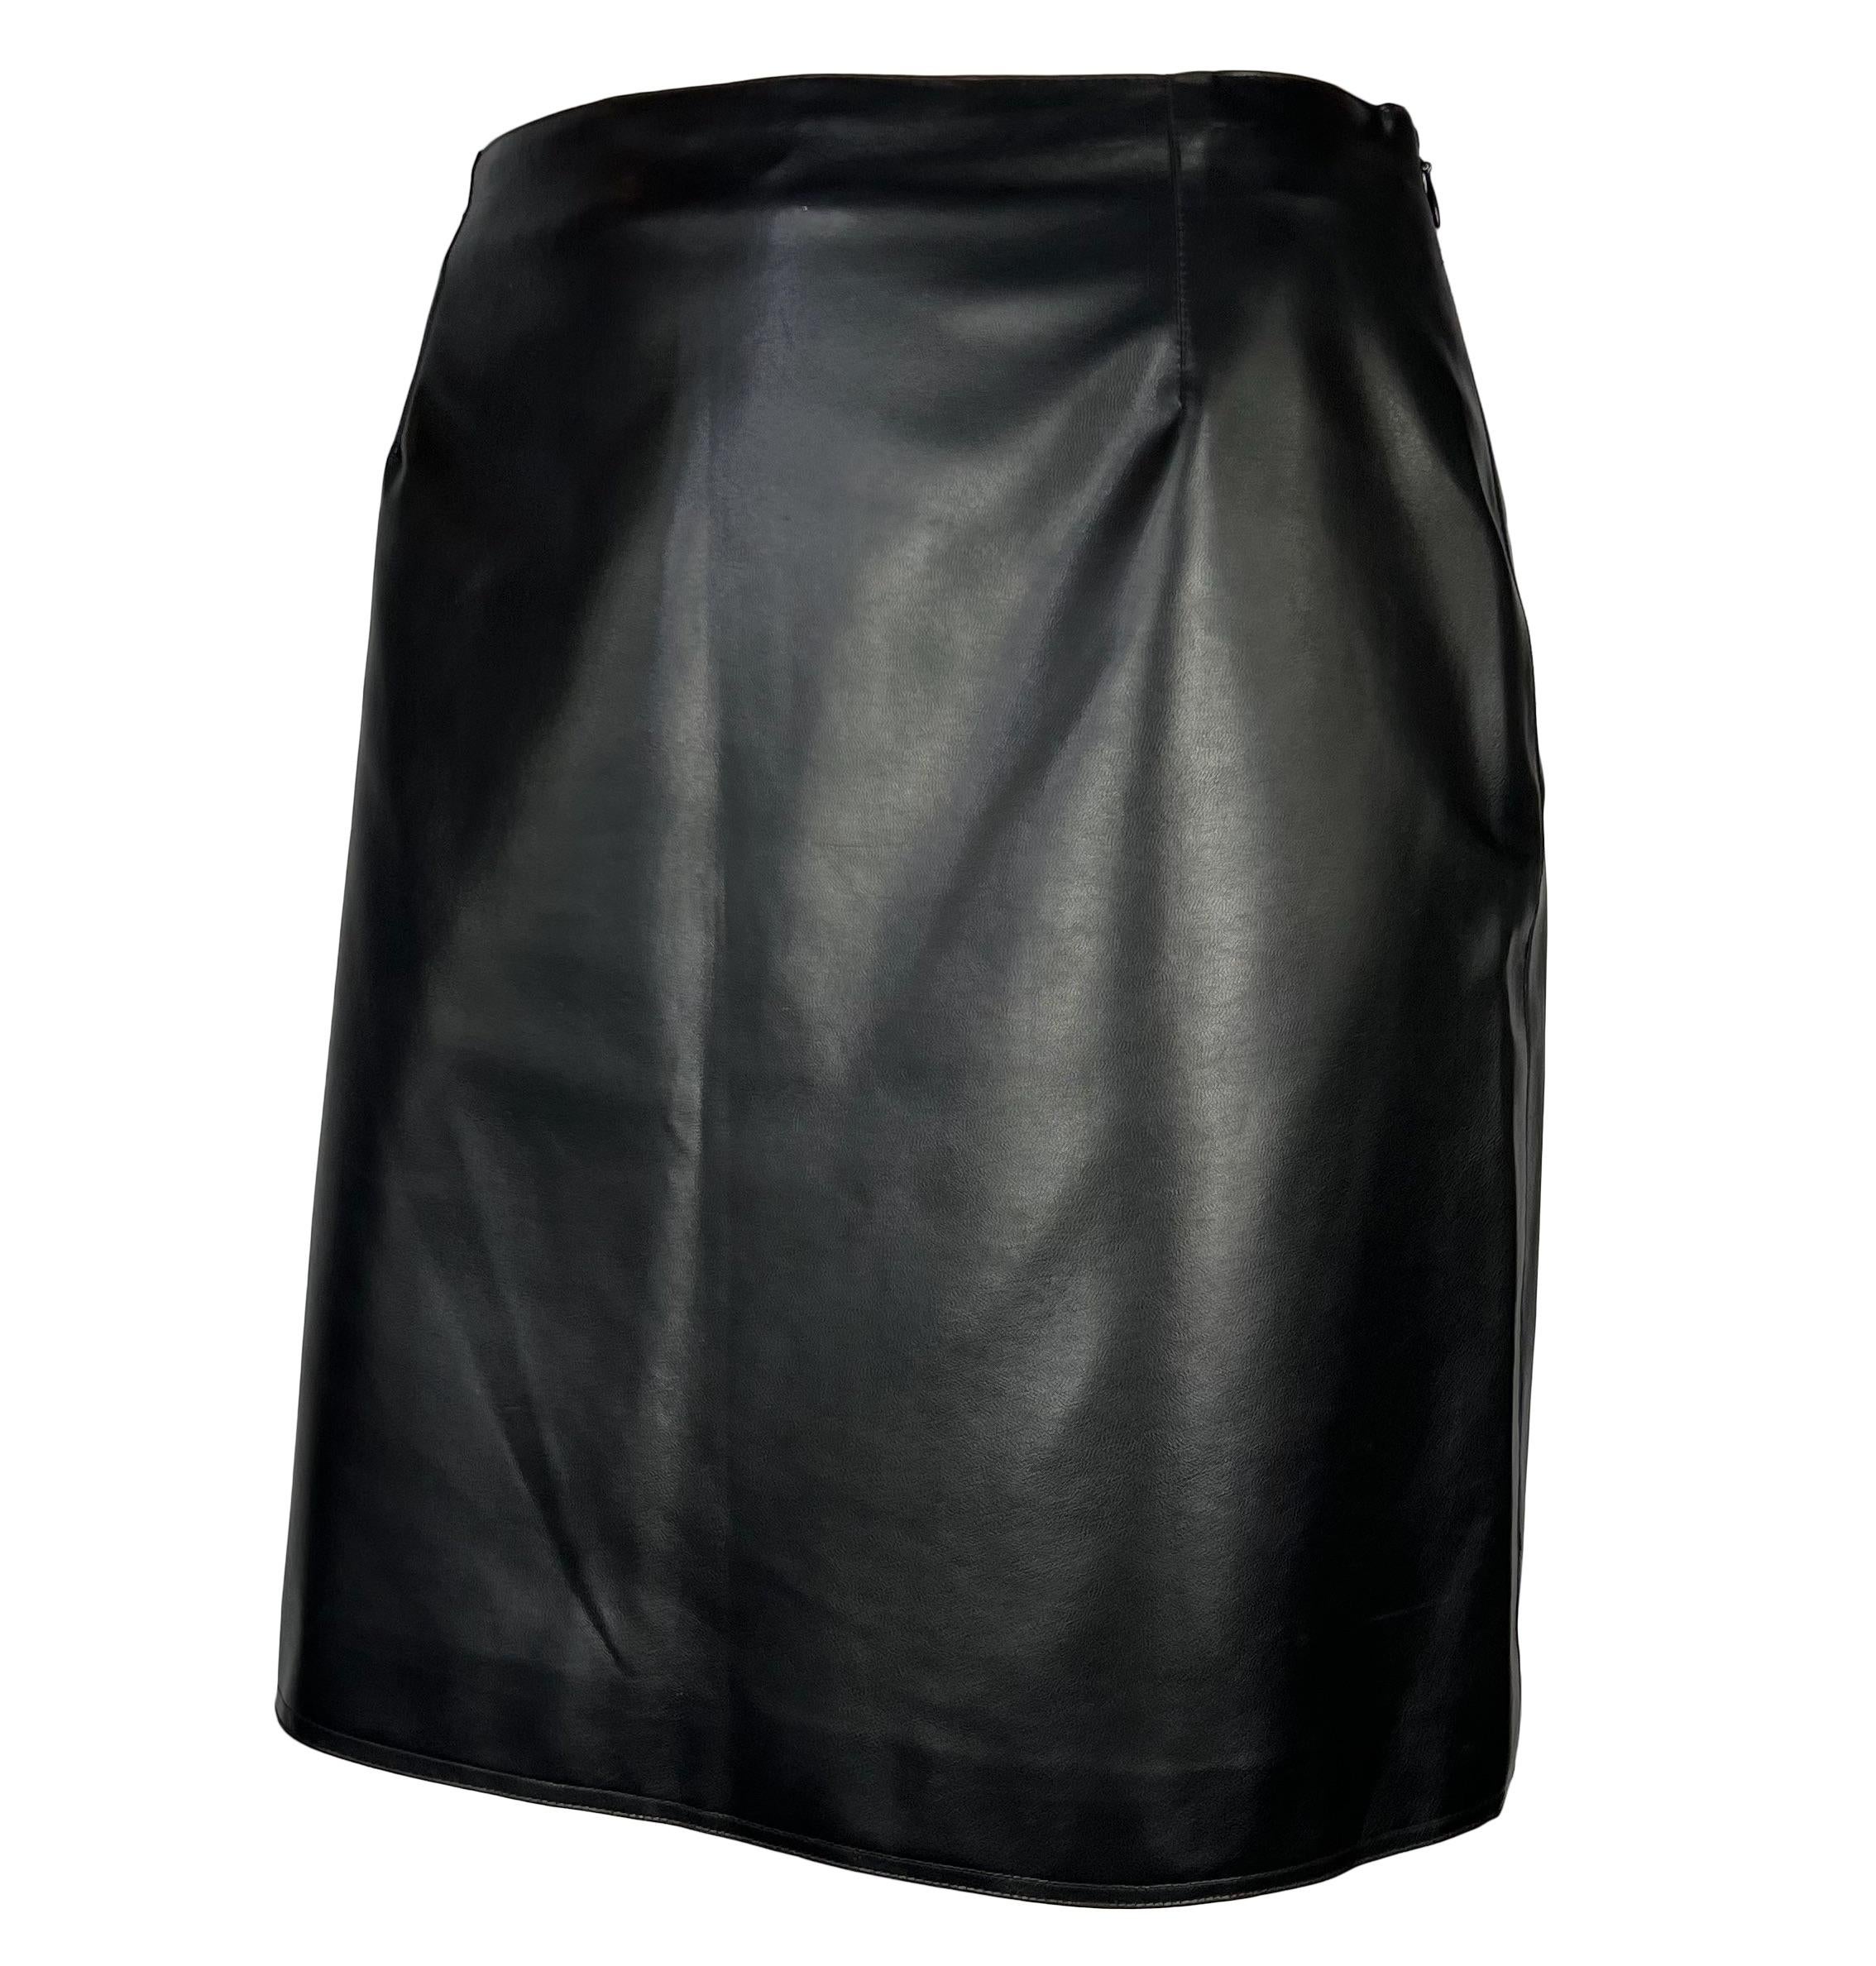 Presenting a fabulous black vegan leather Gianni Versace Couture mini skirt, designed by Gianni Versace. From 1996, this shiny faux leather skirt is a must-have essential for any wardrobe!

Approximate measurements:
Size - IT44 / US10
28.5